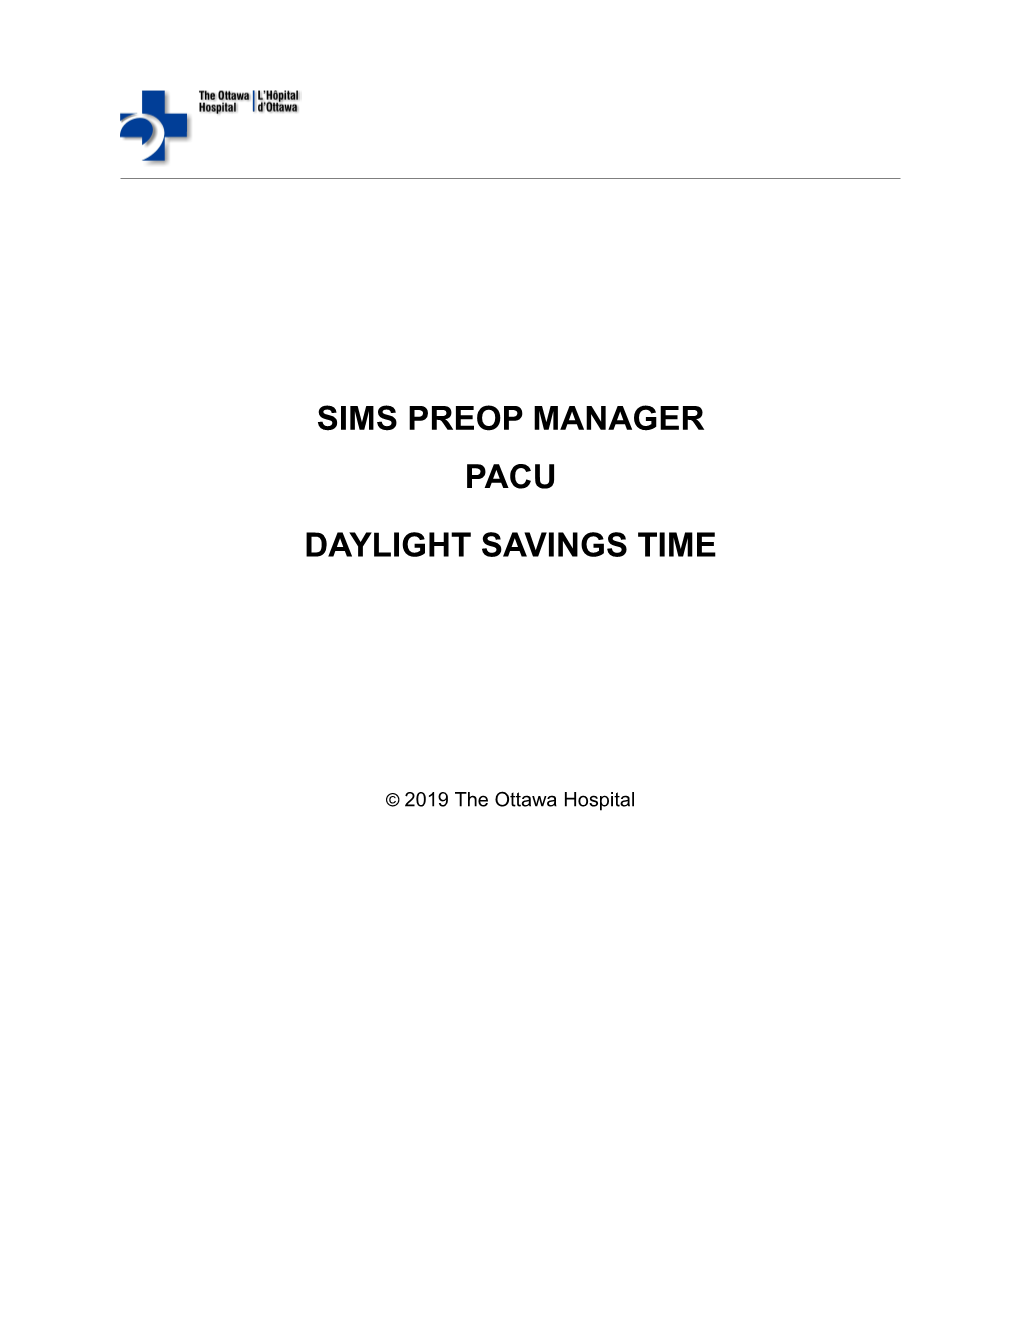 SIMS Preop Manager Pre-Operative Evaluation RN Training Manual